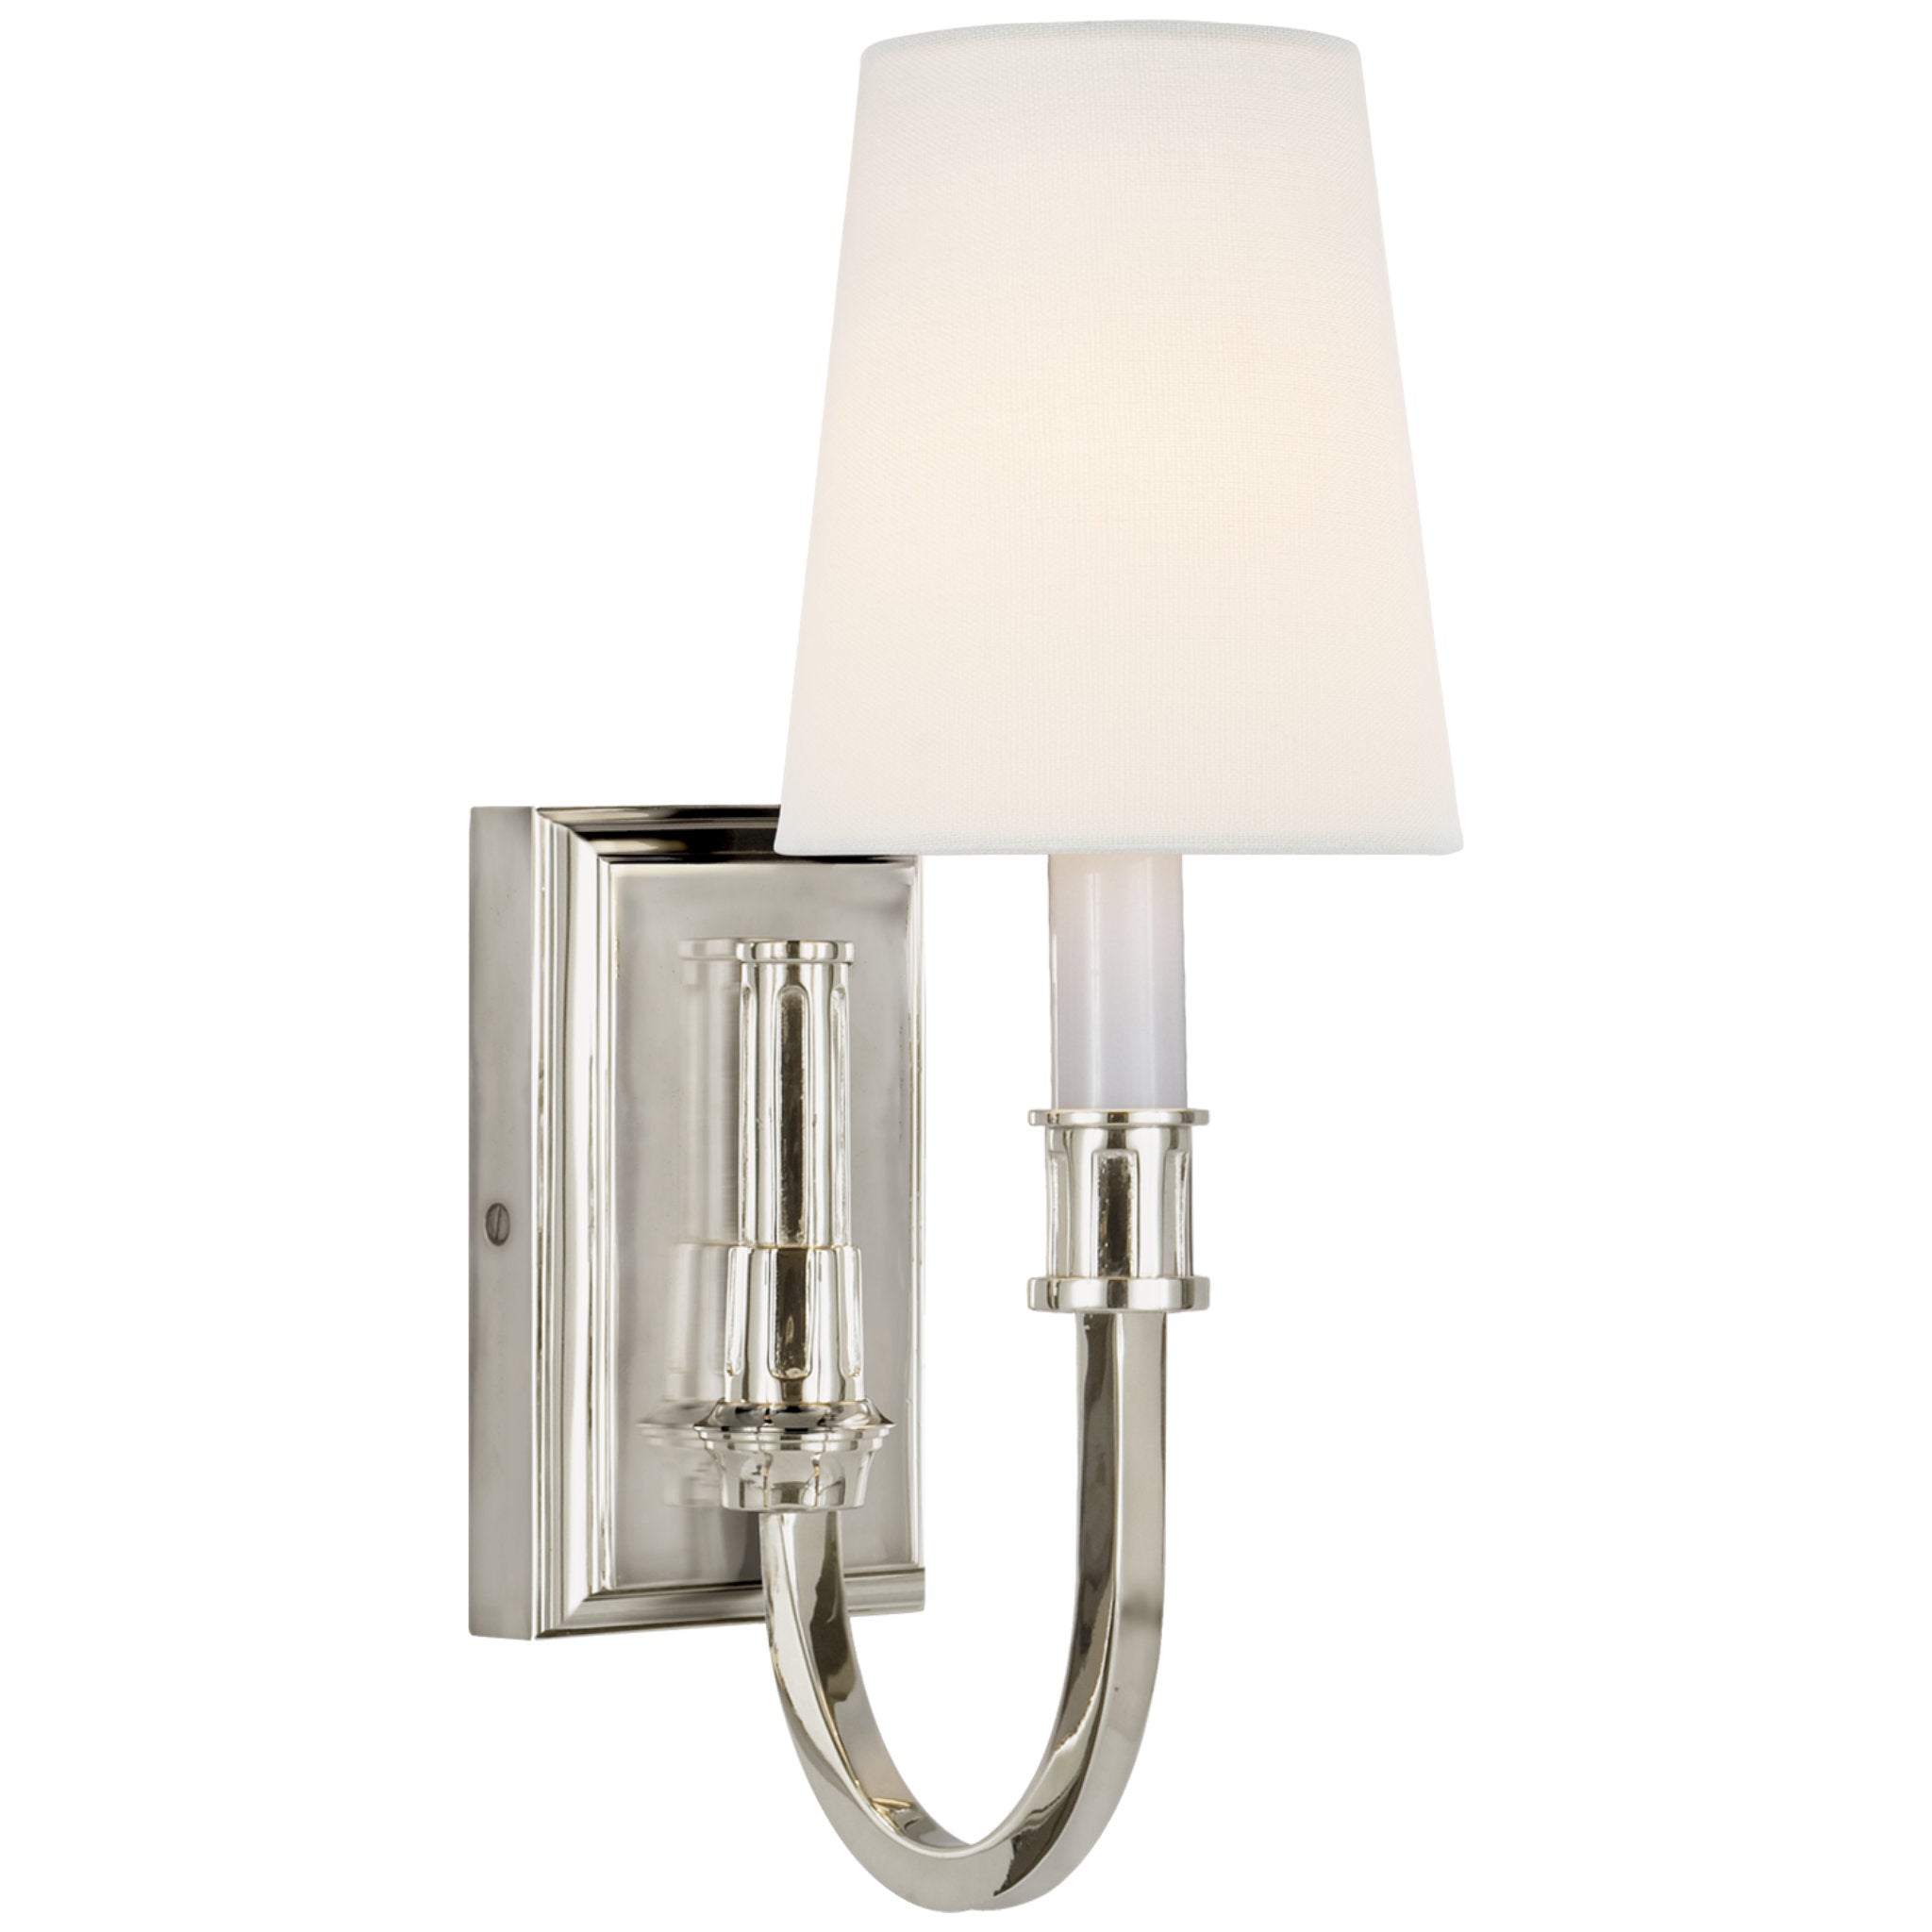 Thomas O'Brien Modern Library Sconce in Polished Nickel with Linen Shade